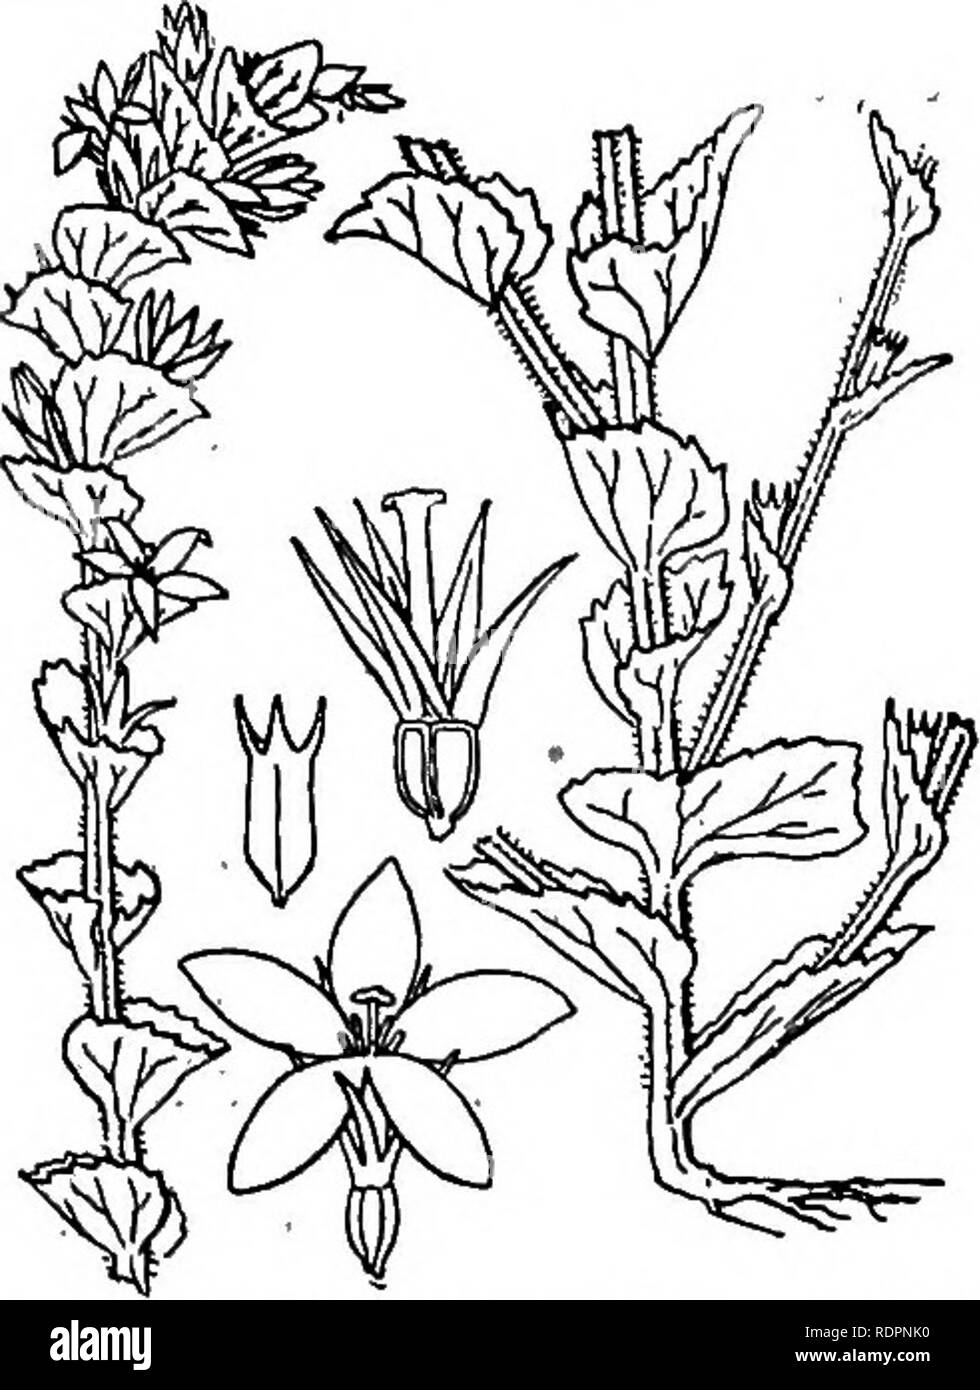 . The Indiana weed book. Weeds. WEEDS- OP THE BELL-FLOWER FAMILY. 141-. ovate, clasping the stem. Flowers solitary or 2-3 together in the axils of the upper leaves; corolla wheel-shaped, blue or violet, 4 inch or rnoije broad; stamens 5, separate. Capsule oblong, opening just below the middle. (Fig. 102.) Common in dry or sandy rather poor soil in southern Indiana; infre- quent northward. May-Sept. It oc- curs mostly in grain fields, thinly seeded meadows and waste places, the flowers closing by noon or mid- afternoon. Those on the lower part of the stem are usually rudimentary, without coroll Stock Photo